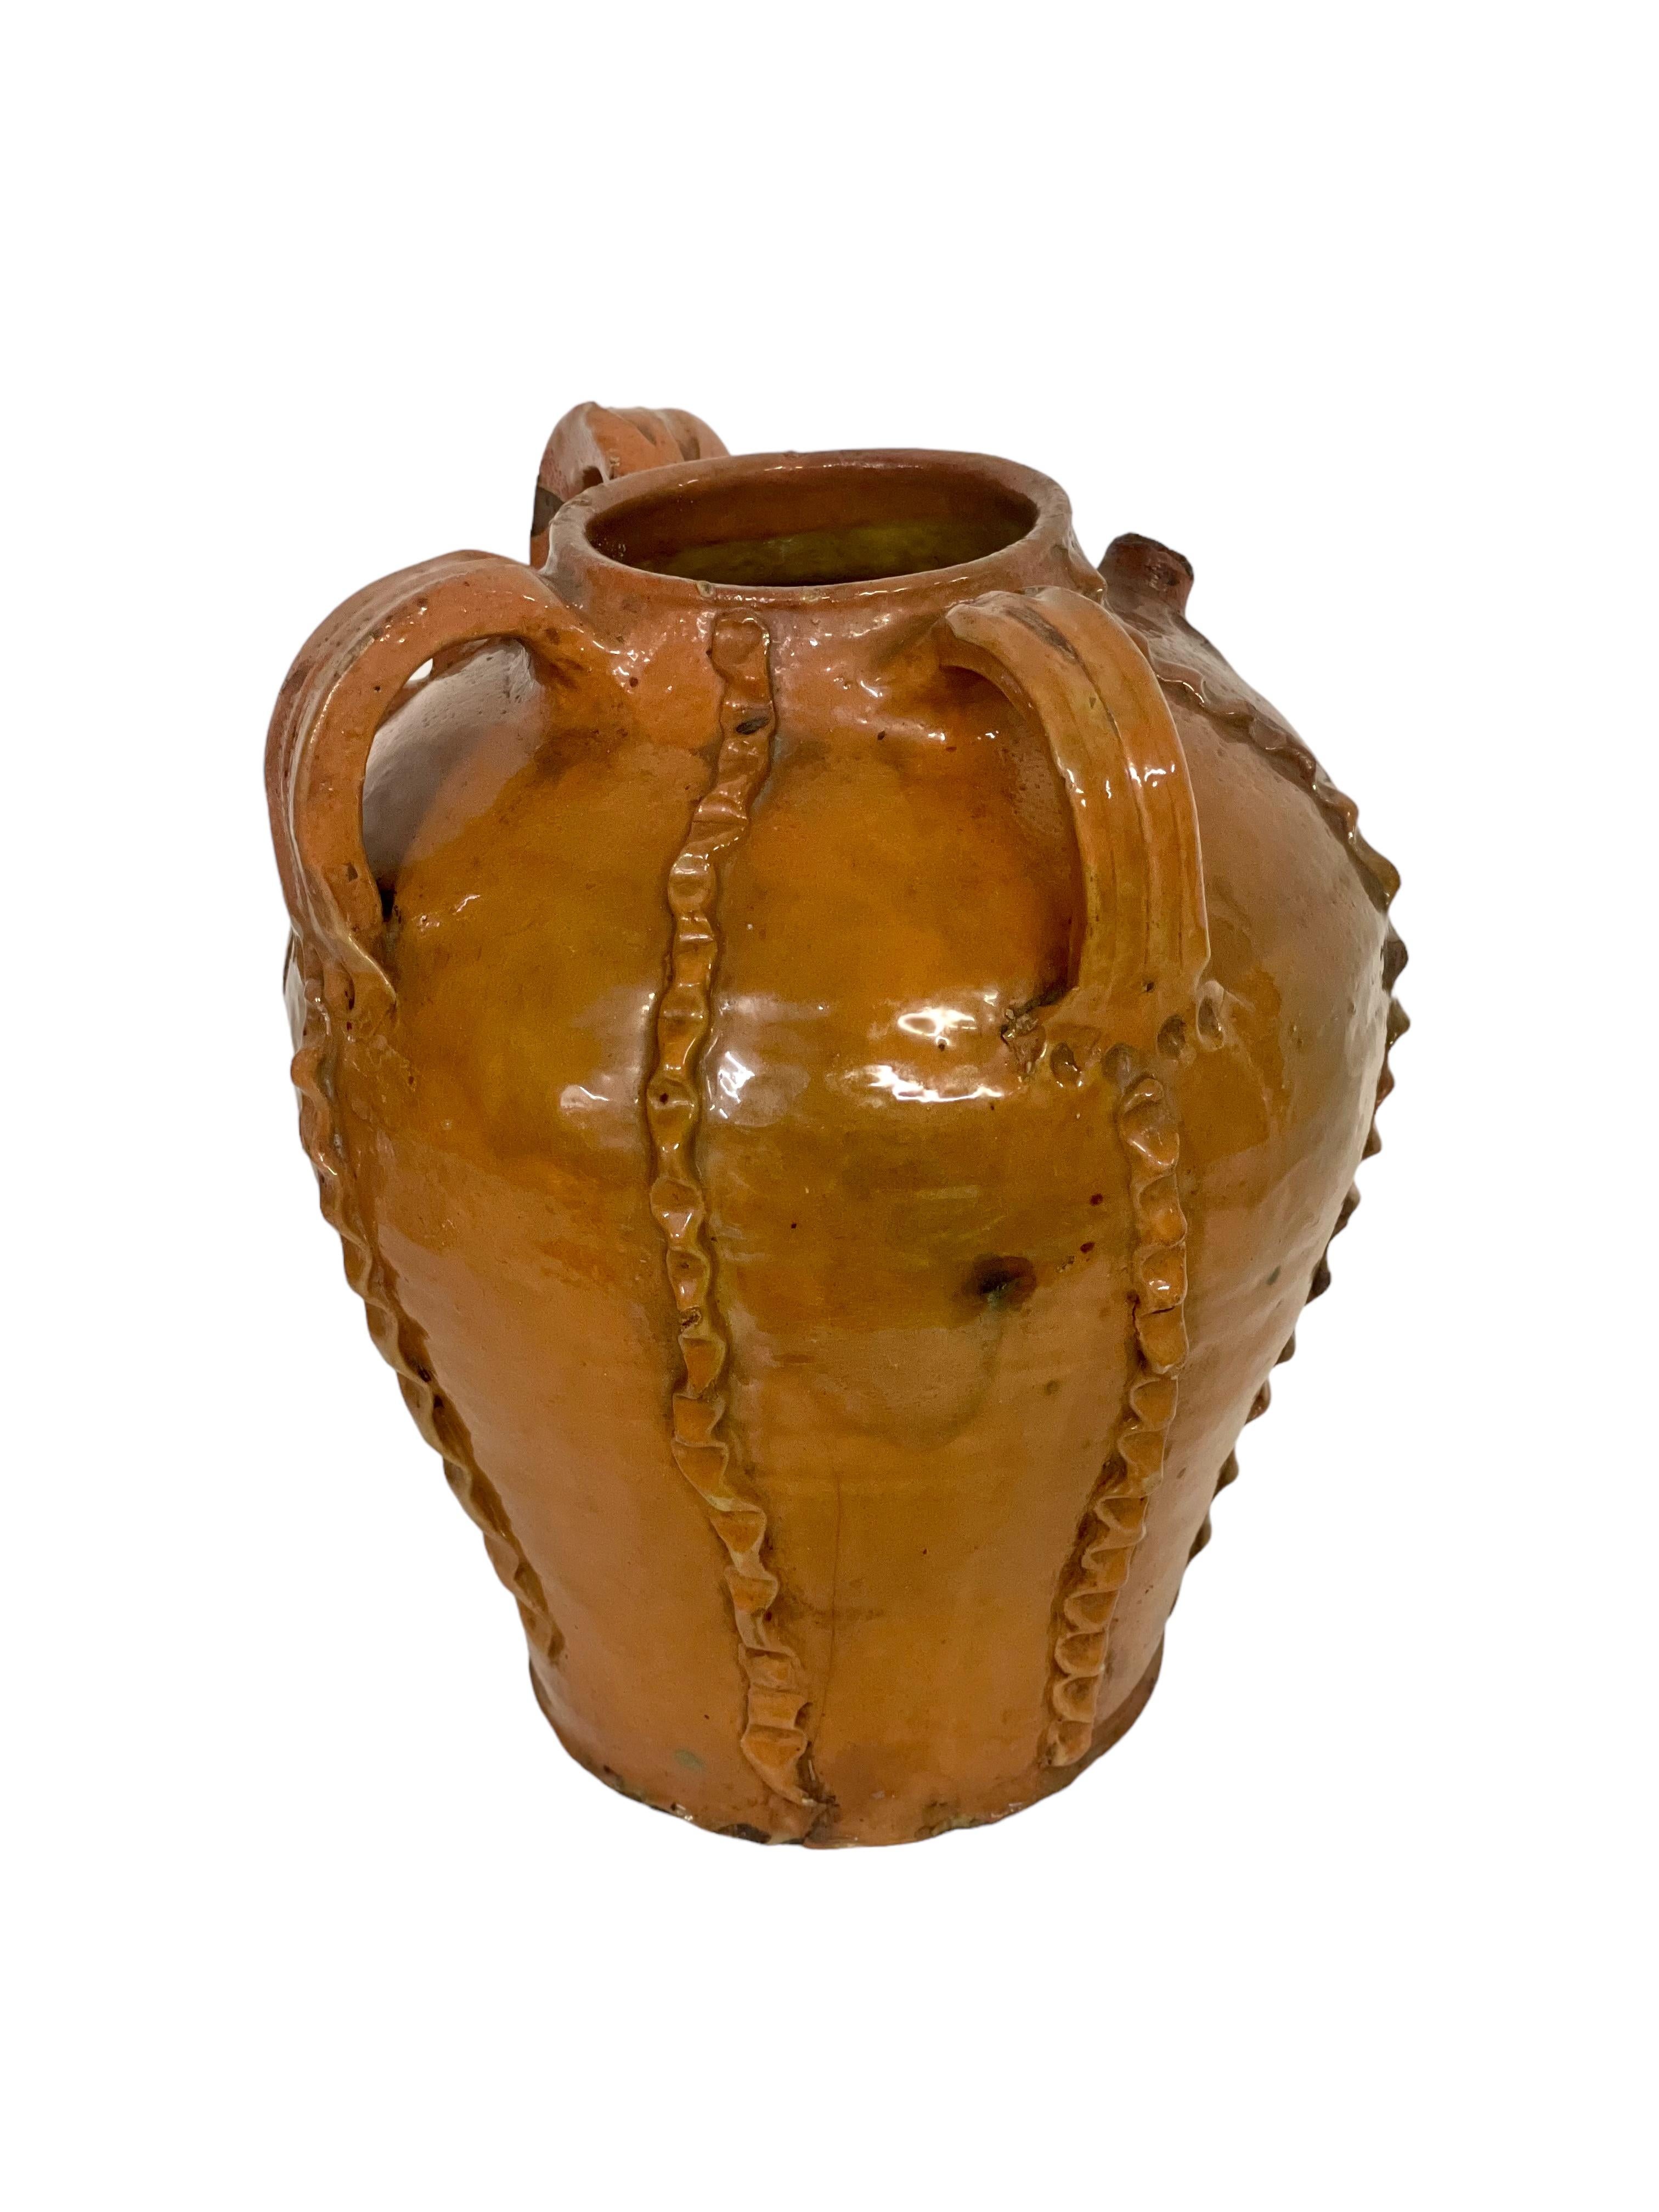 A tall and shapely antique walnut oil jug, originating from the Dordogne region of France, fully glazed in a rich and glossy golden brown, and further embellished with multiple applied and pinched vertical bands. This elegant 18th century pot would